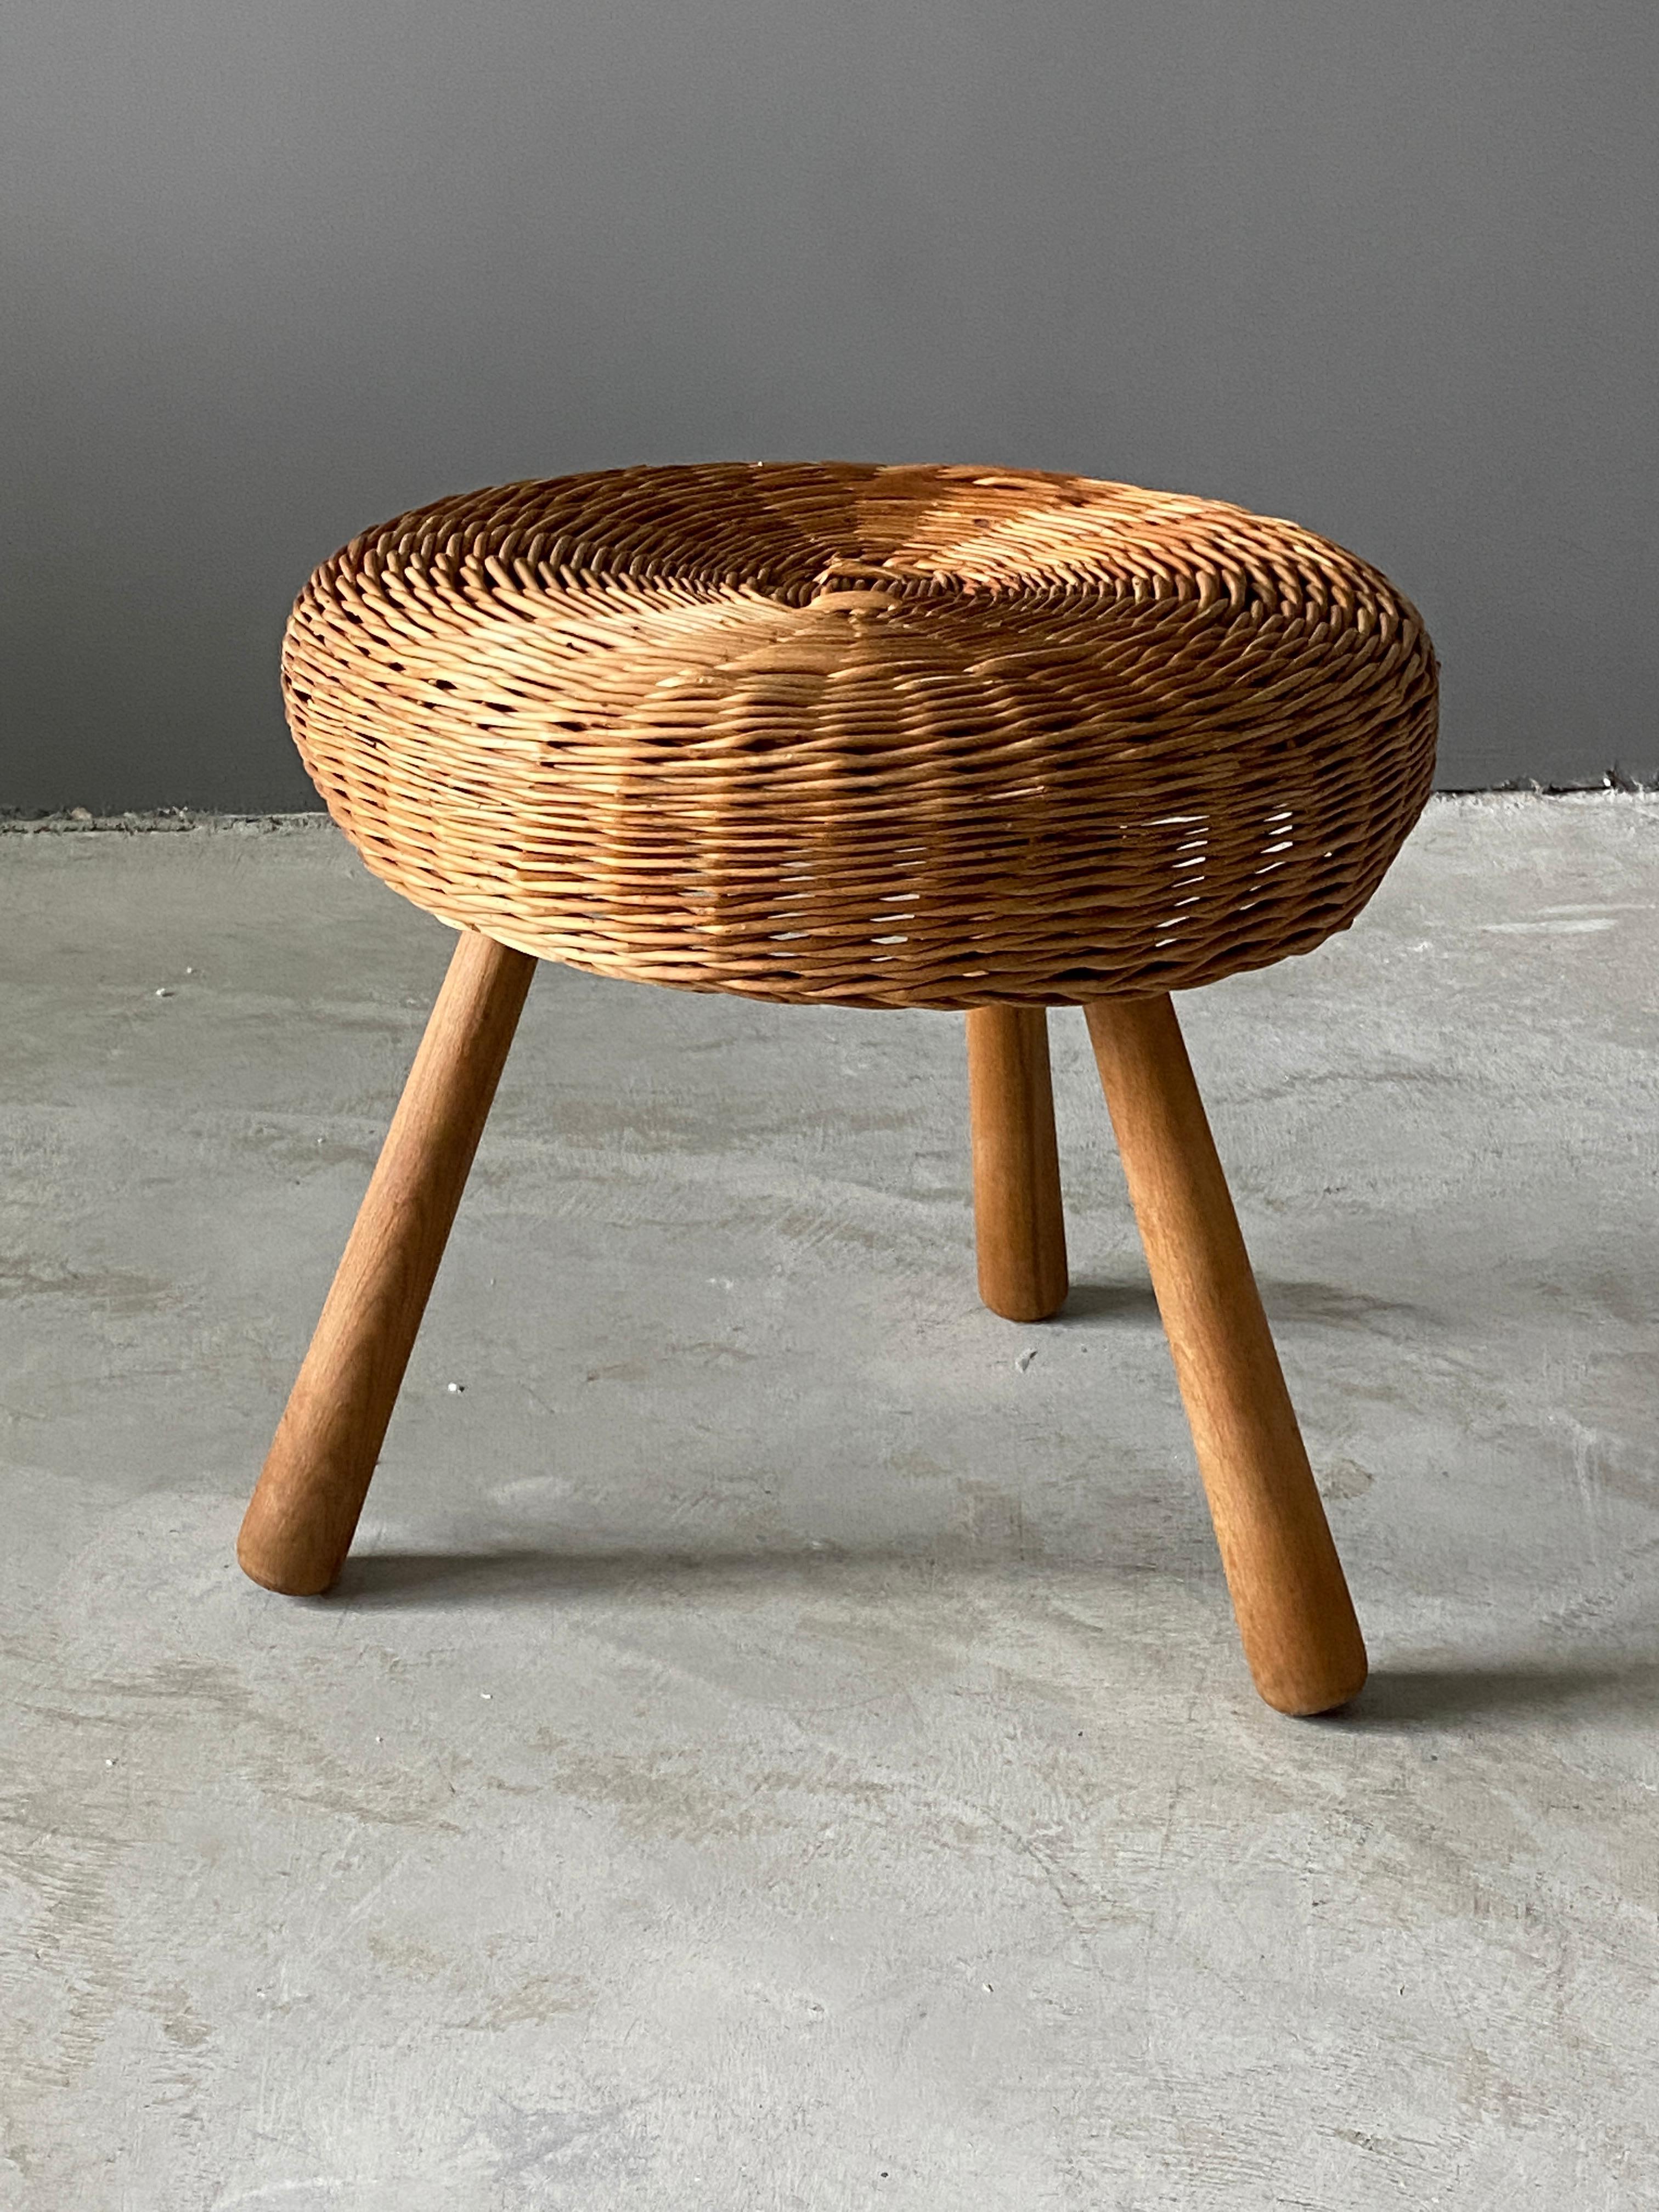 *Specifications stated in client conversation*

A large version stool, design attributed to Tony Paul. Features an interesting mix of rattan and finely carved solid wood.

Other designers of Minimalist stools of the period include Charlotte